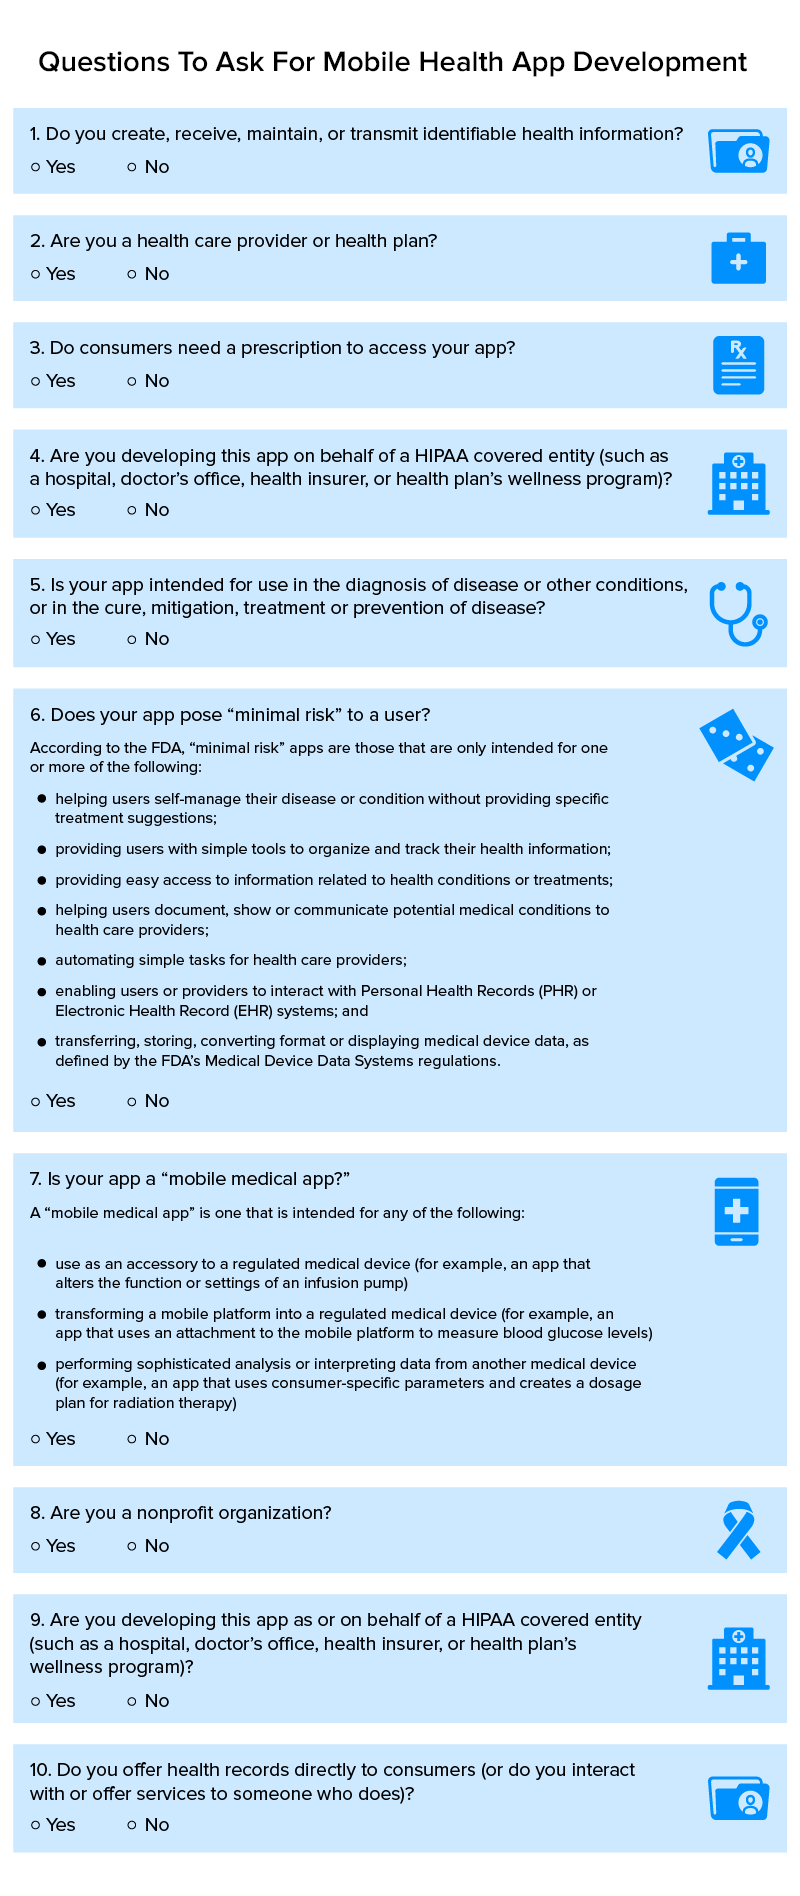 Questions To Ask For Mobile Health App Development_